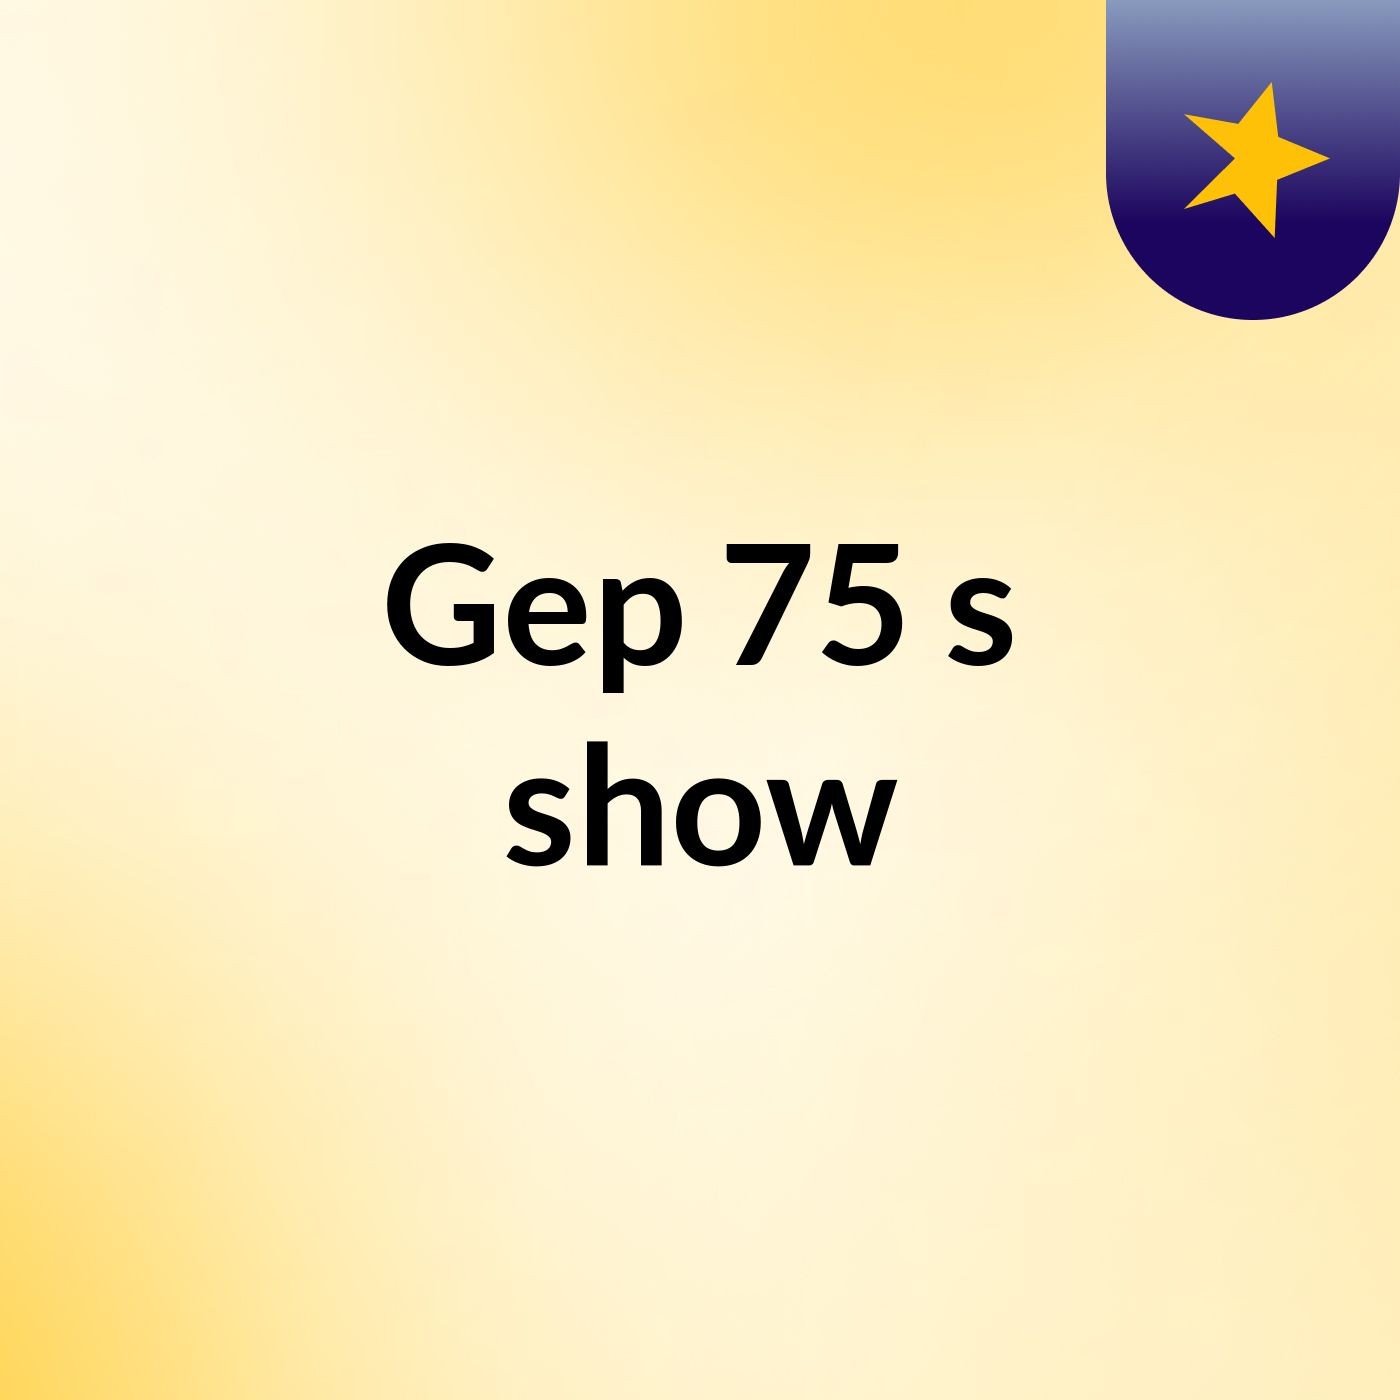 Gep 75's show